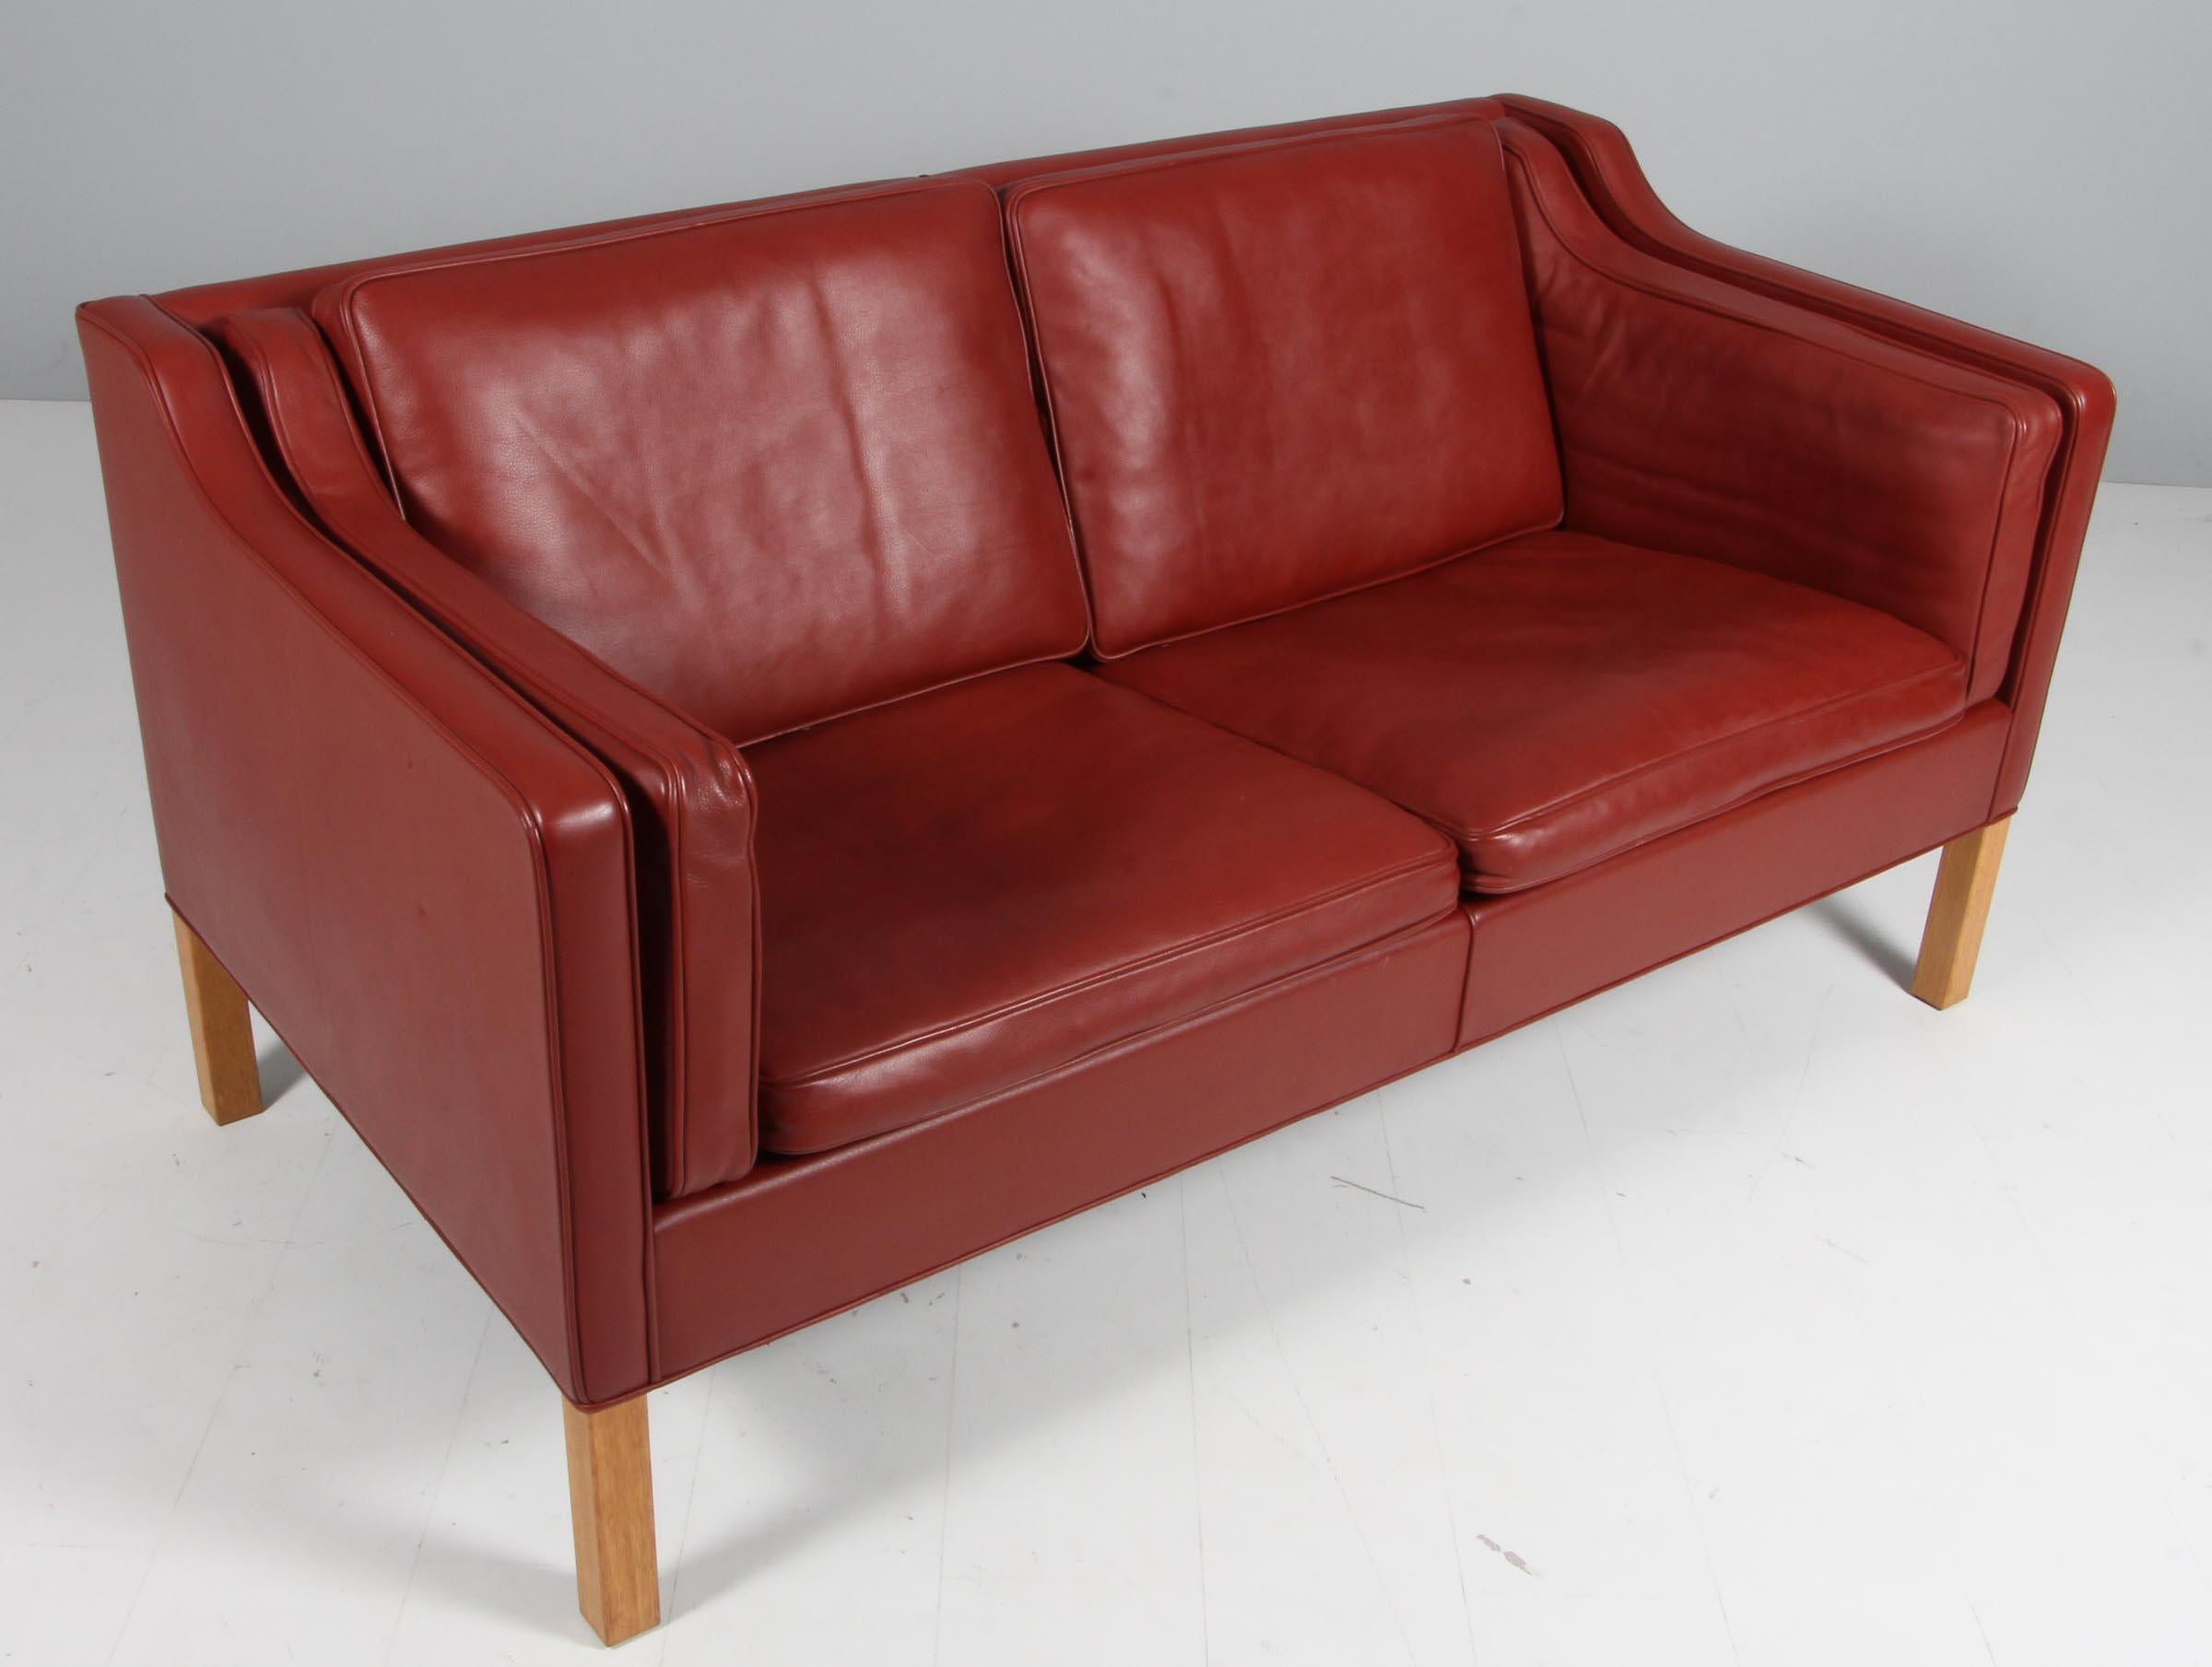 Børge Mogensen two-seat sofa with original patinated leather upholstery.

Legs of oak.

Model 2212, made by Fredericia Furniture.